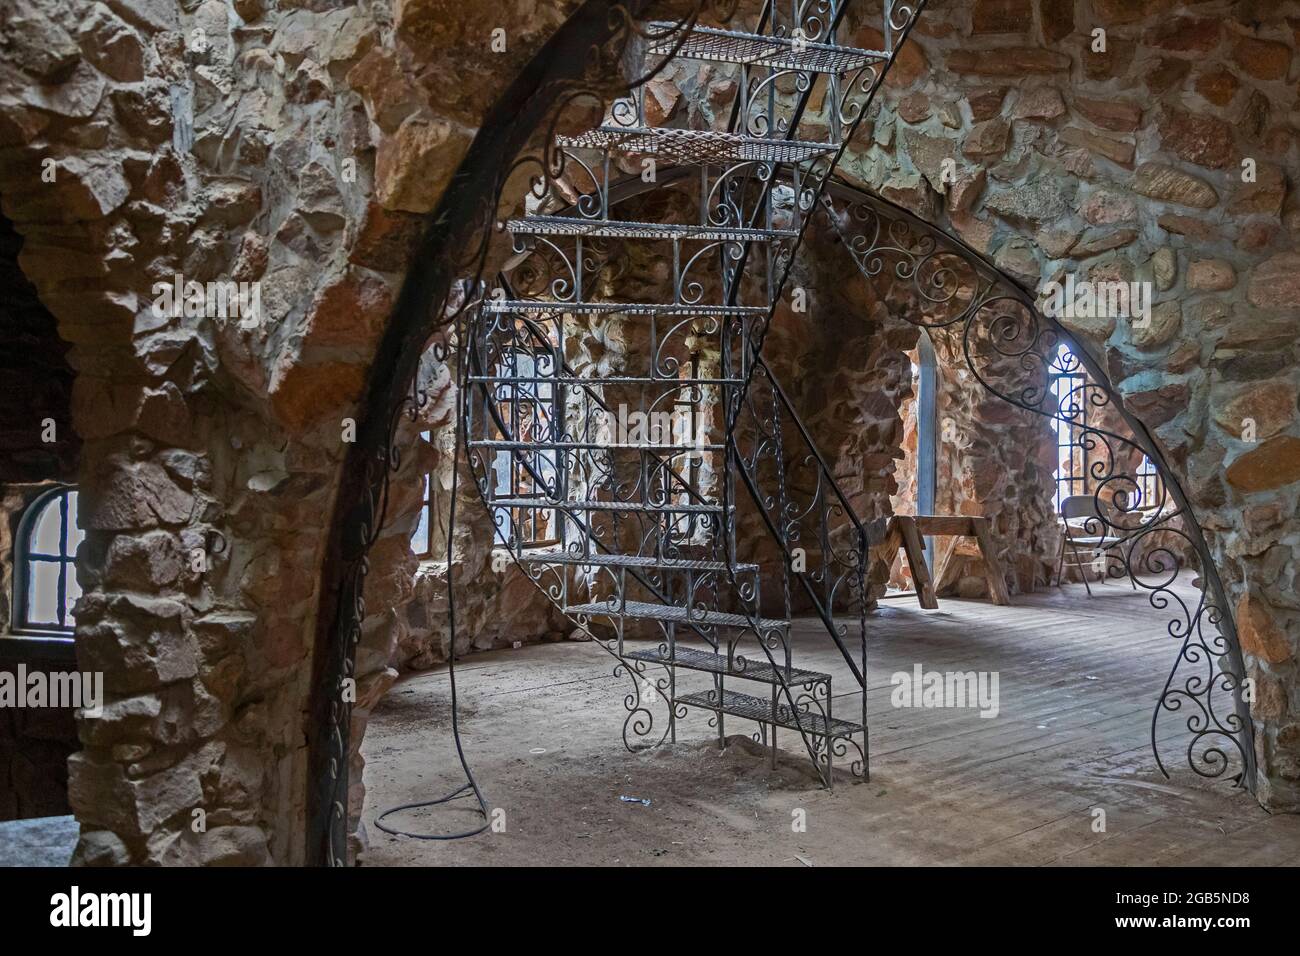 Rye, Colorado - An ornamental iron stairway in Bishop Castle. The Castle is an elaborate stone and metal structure and roadside attraction. It is bein Stock Photo